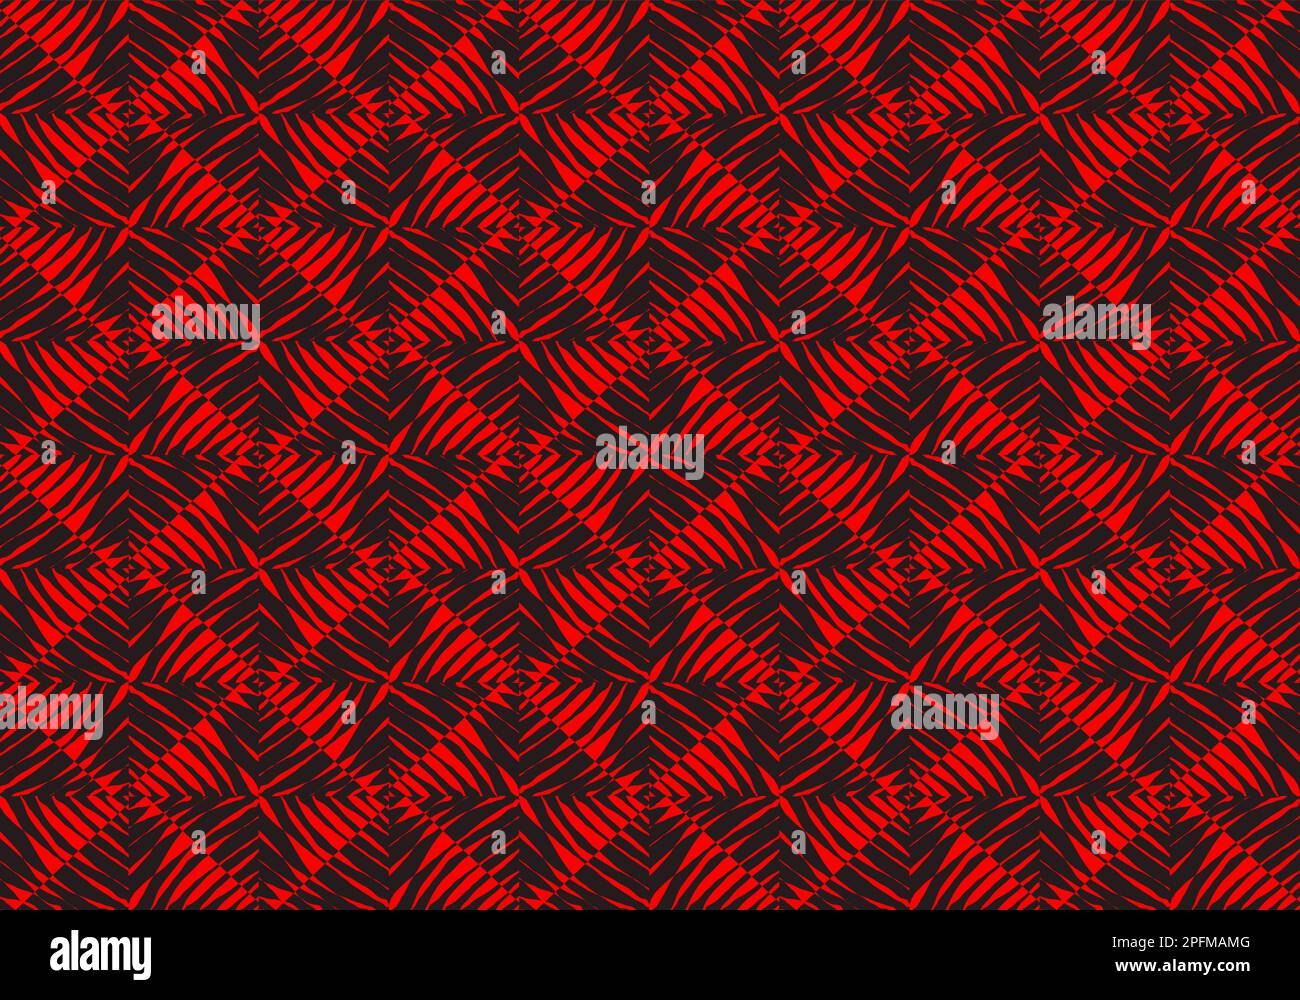 Red and Black Leaf Pattern Mosaic Tiles Design Art for Backgrounds. Seamless Pattern. Mosaic. Geometry. Vector Illustration Graphic Design. Stock Vector